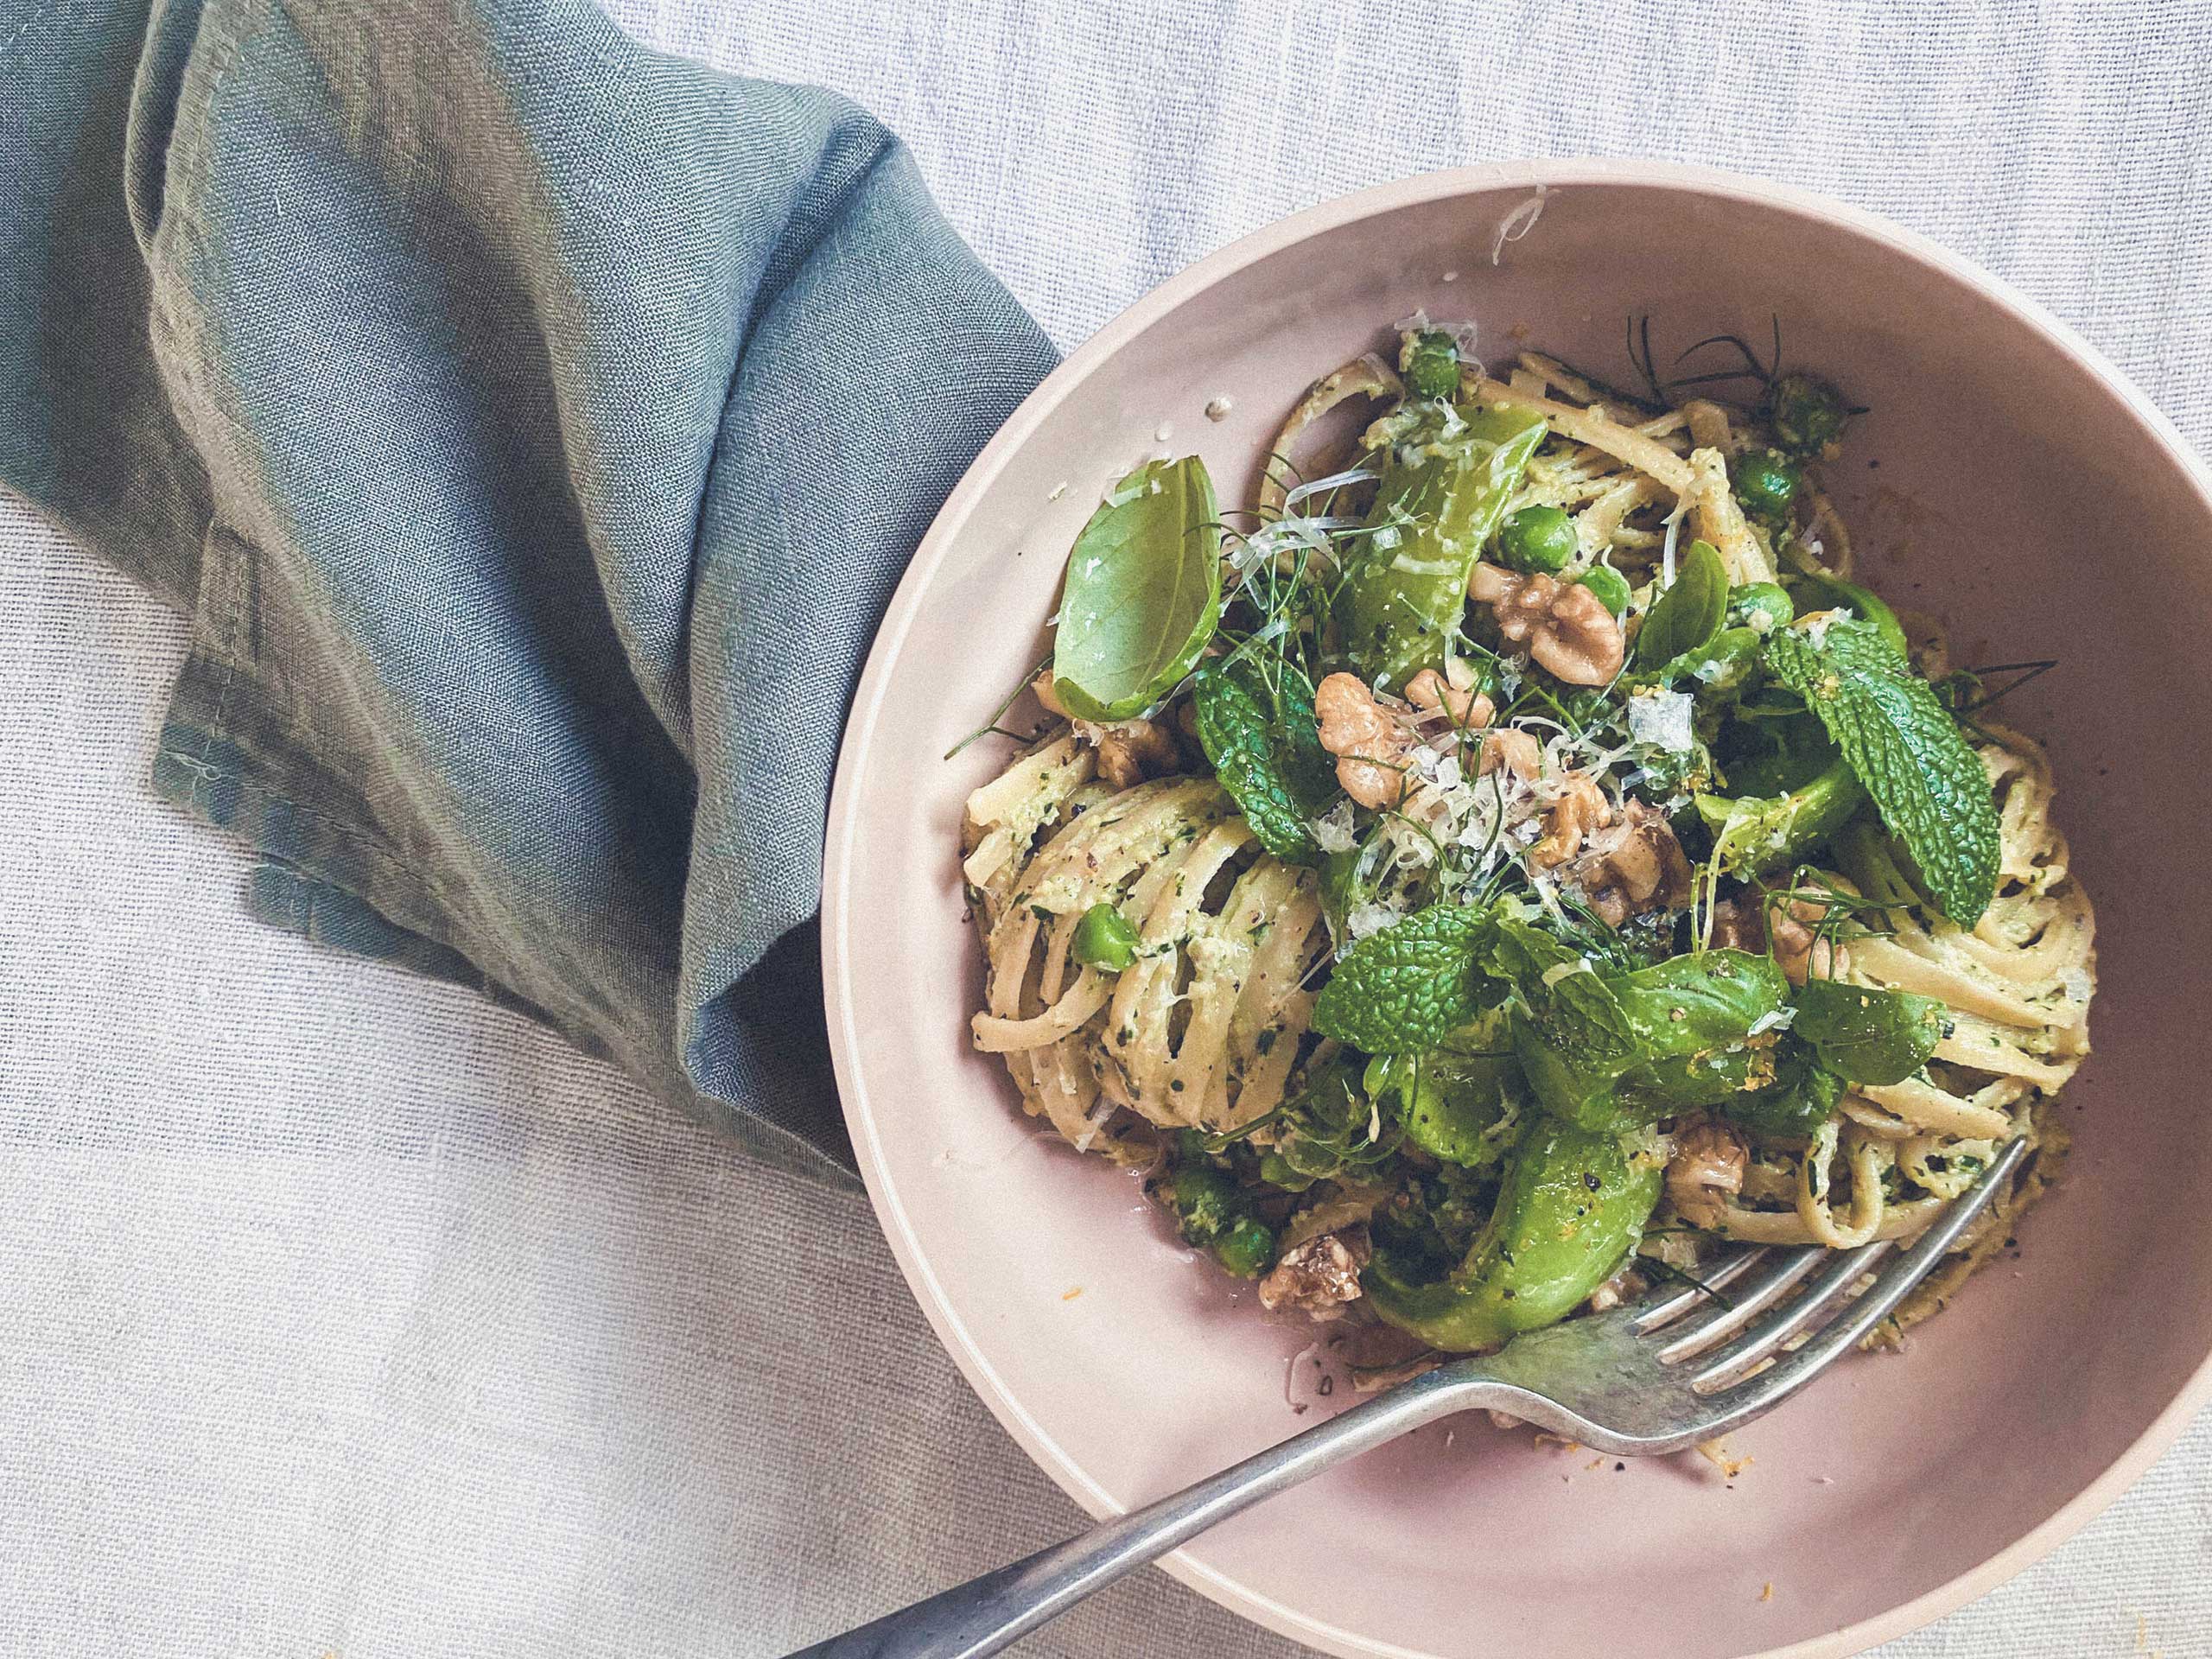 Styleware Style Files From Our Kitchen Recipe Series. The combination of walnuts, ricotta and herbs in this green linguine make it ever so moreish.